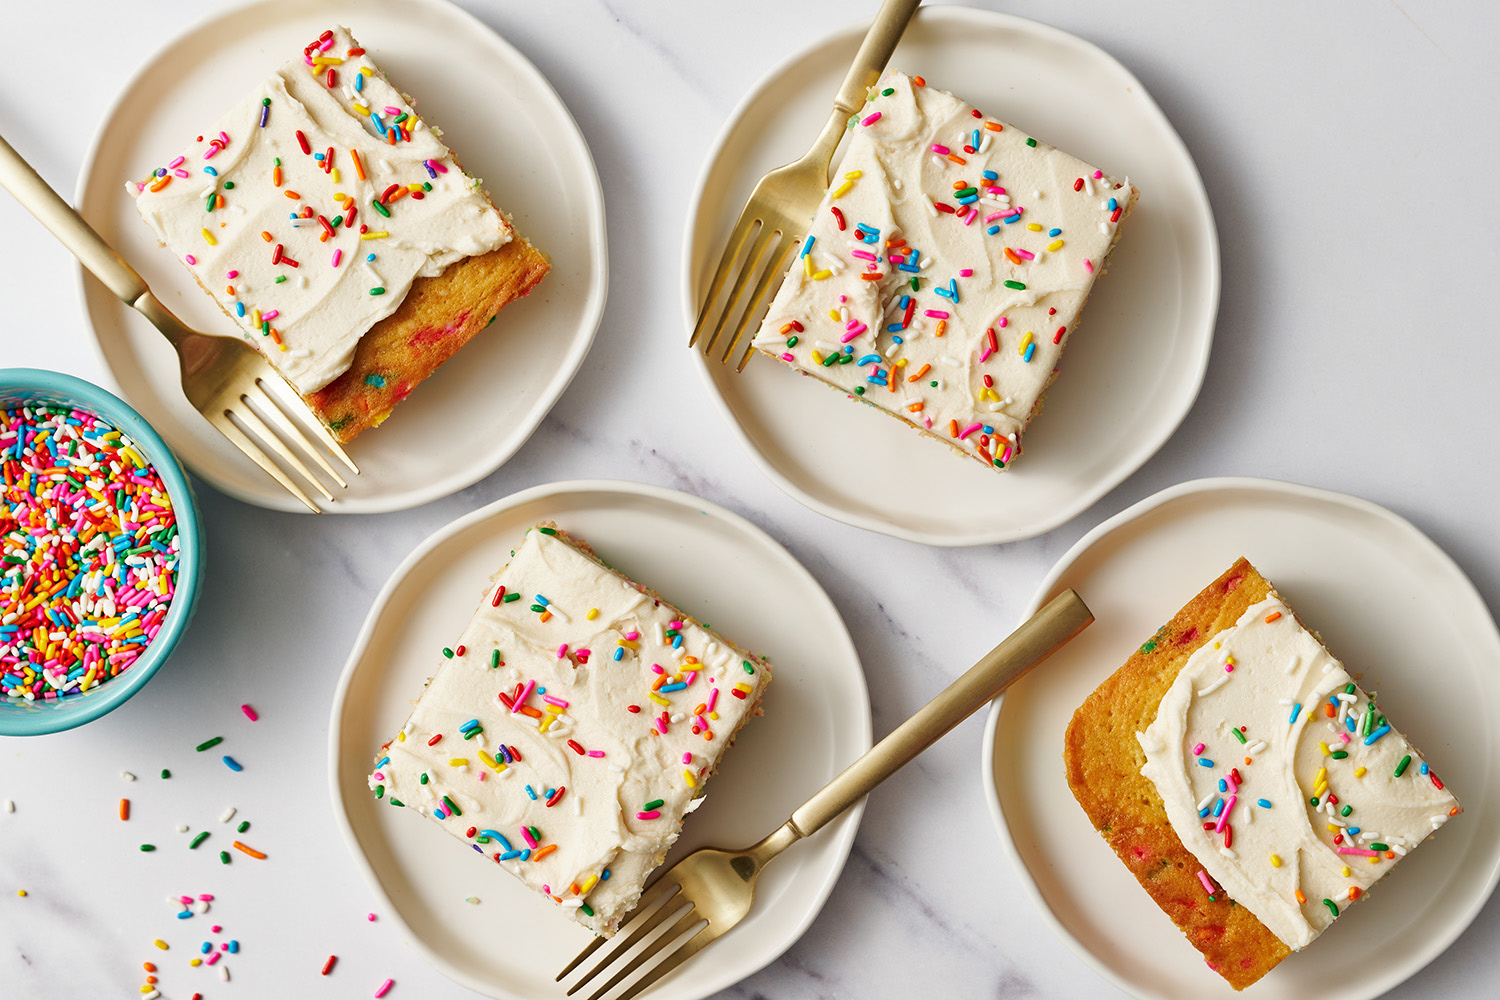 slices of funfetti cake on white plates with forks to serve.